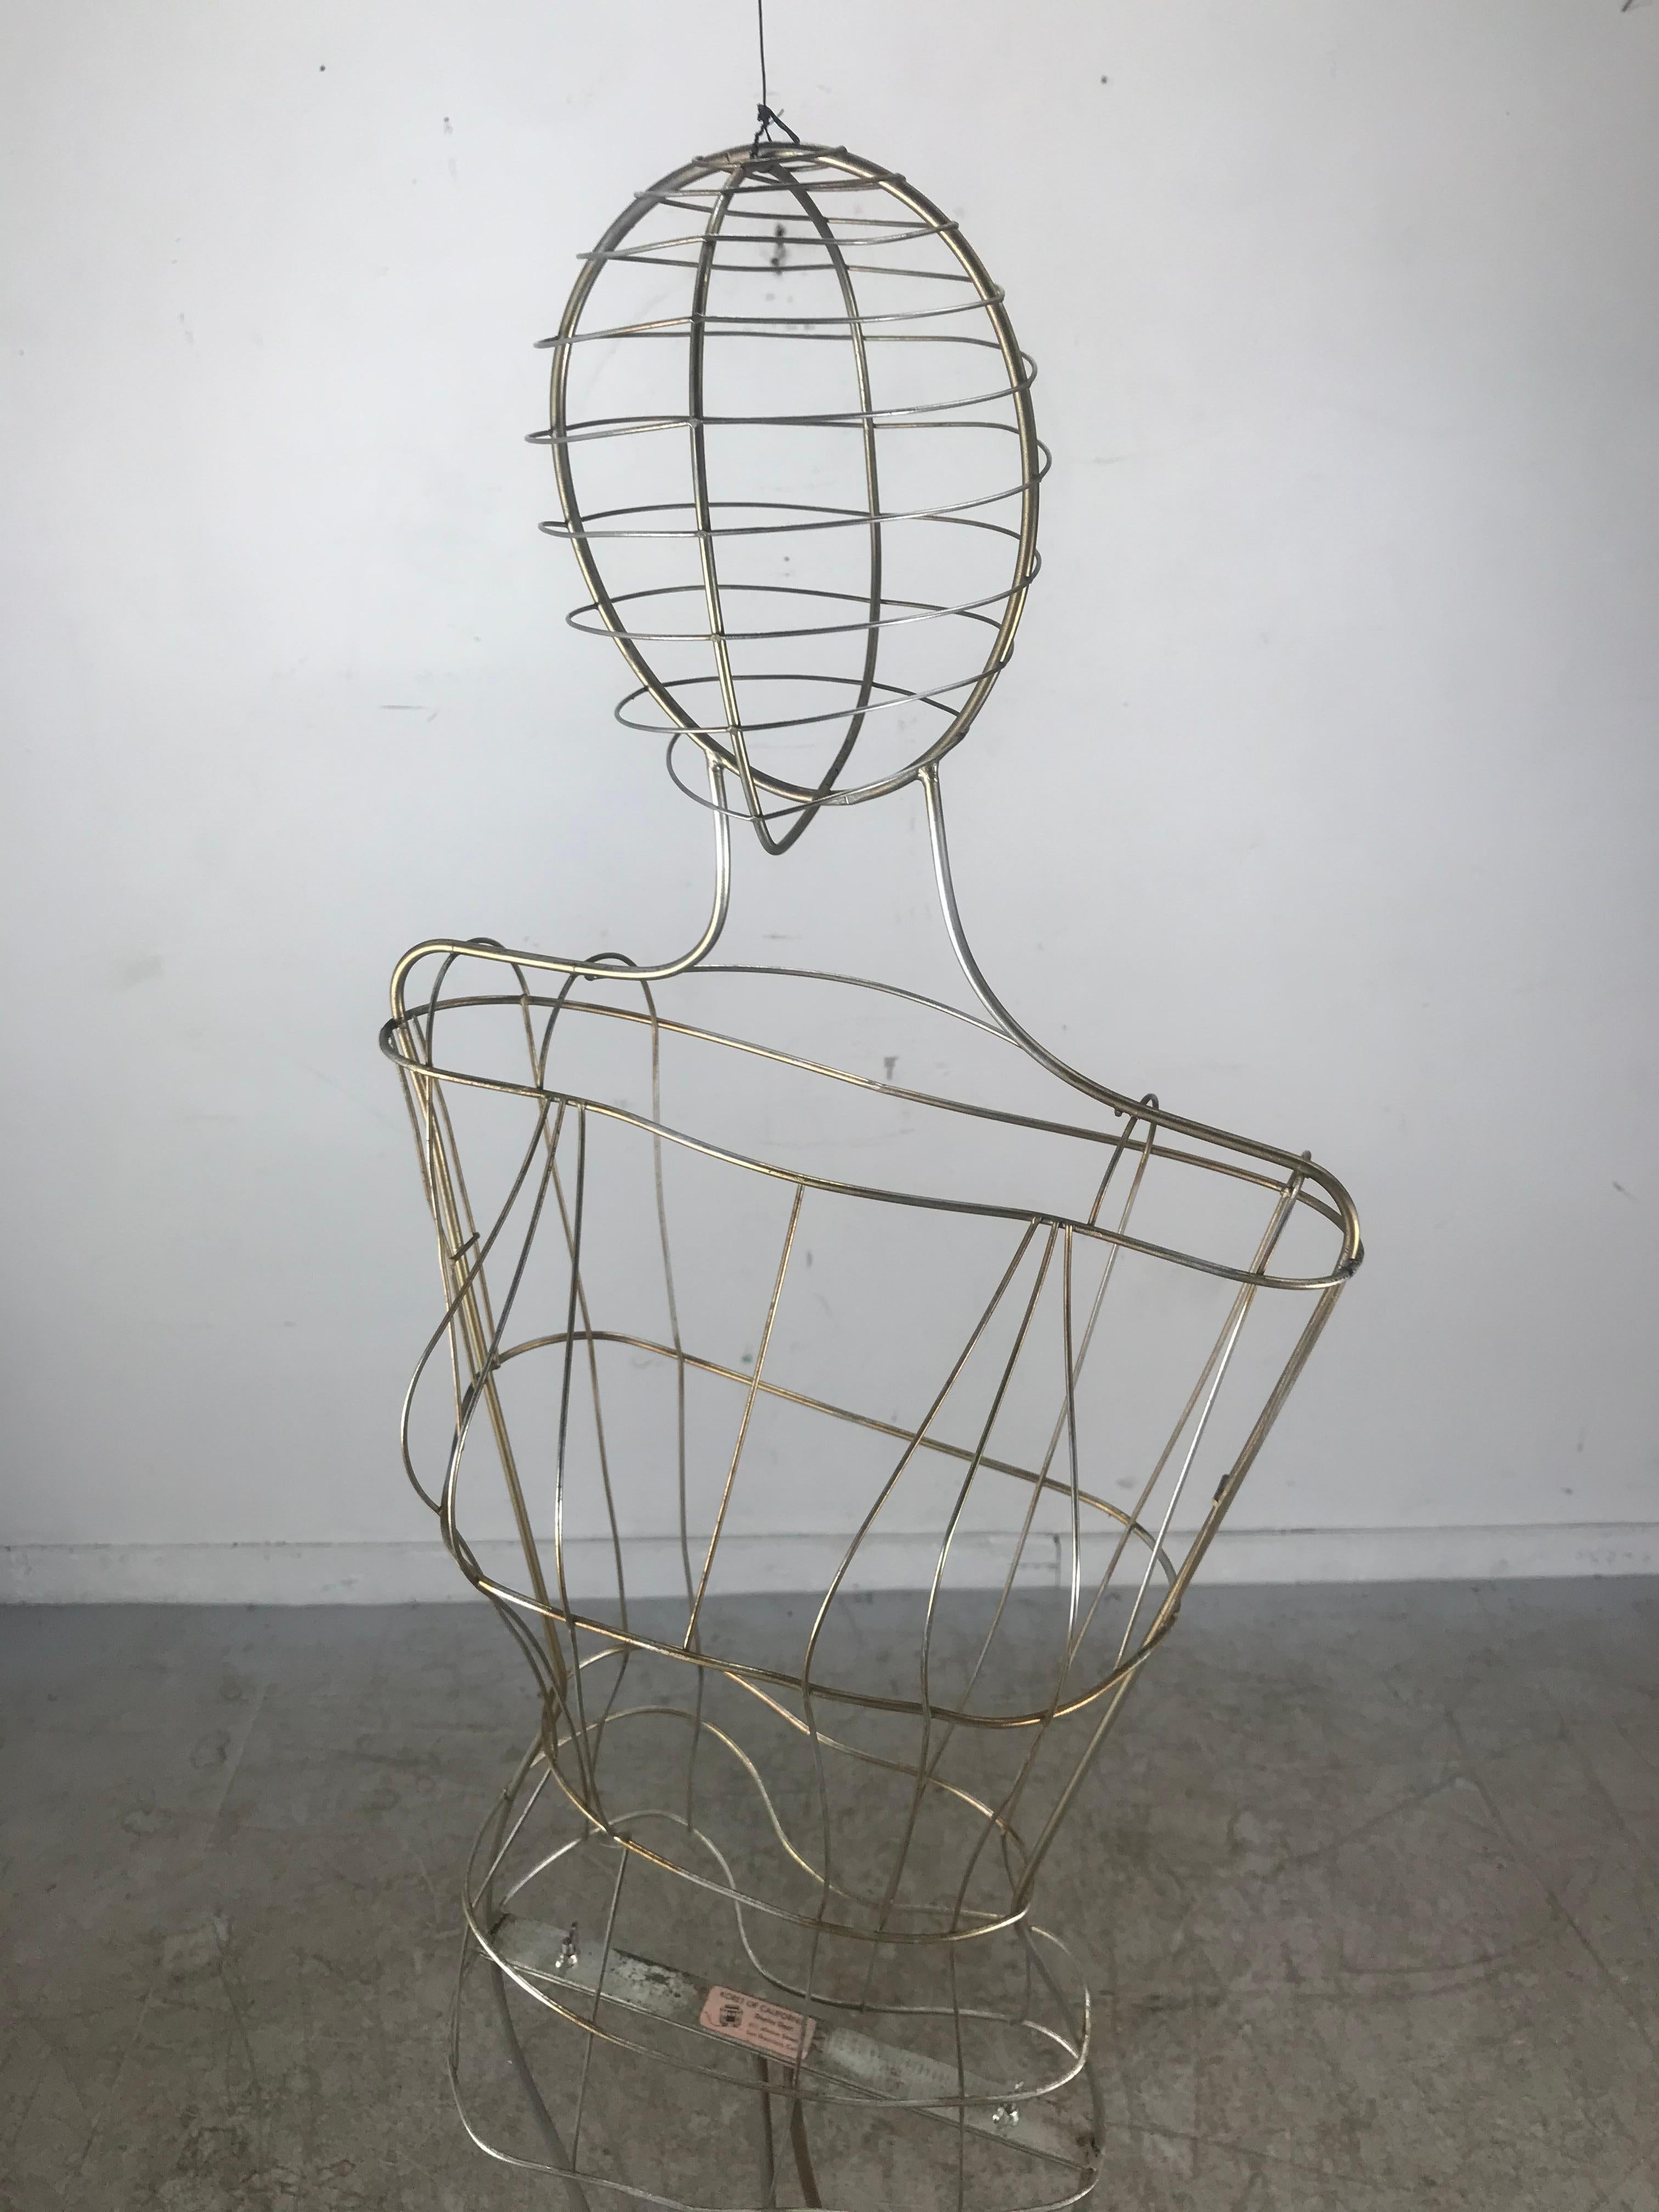 Koret of California stylized wire mannequin or store display, manner of Calder, amazing sculptural design, retains original label. Makes a wonderful hanging kinetic sculpture.